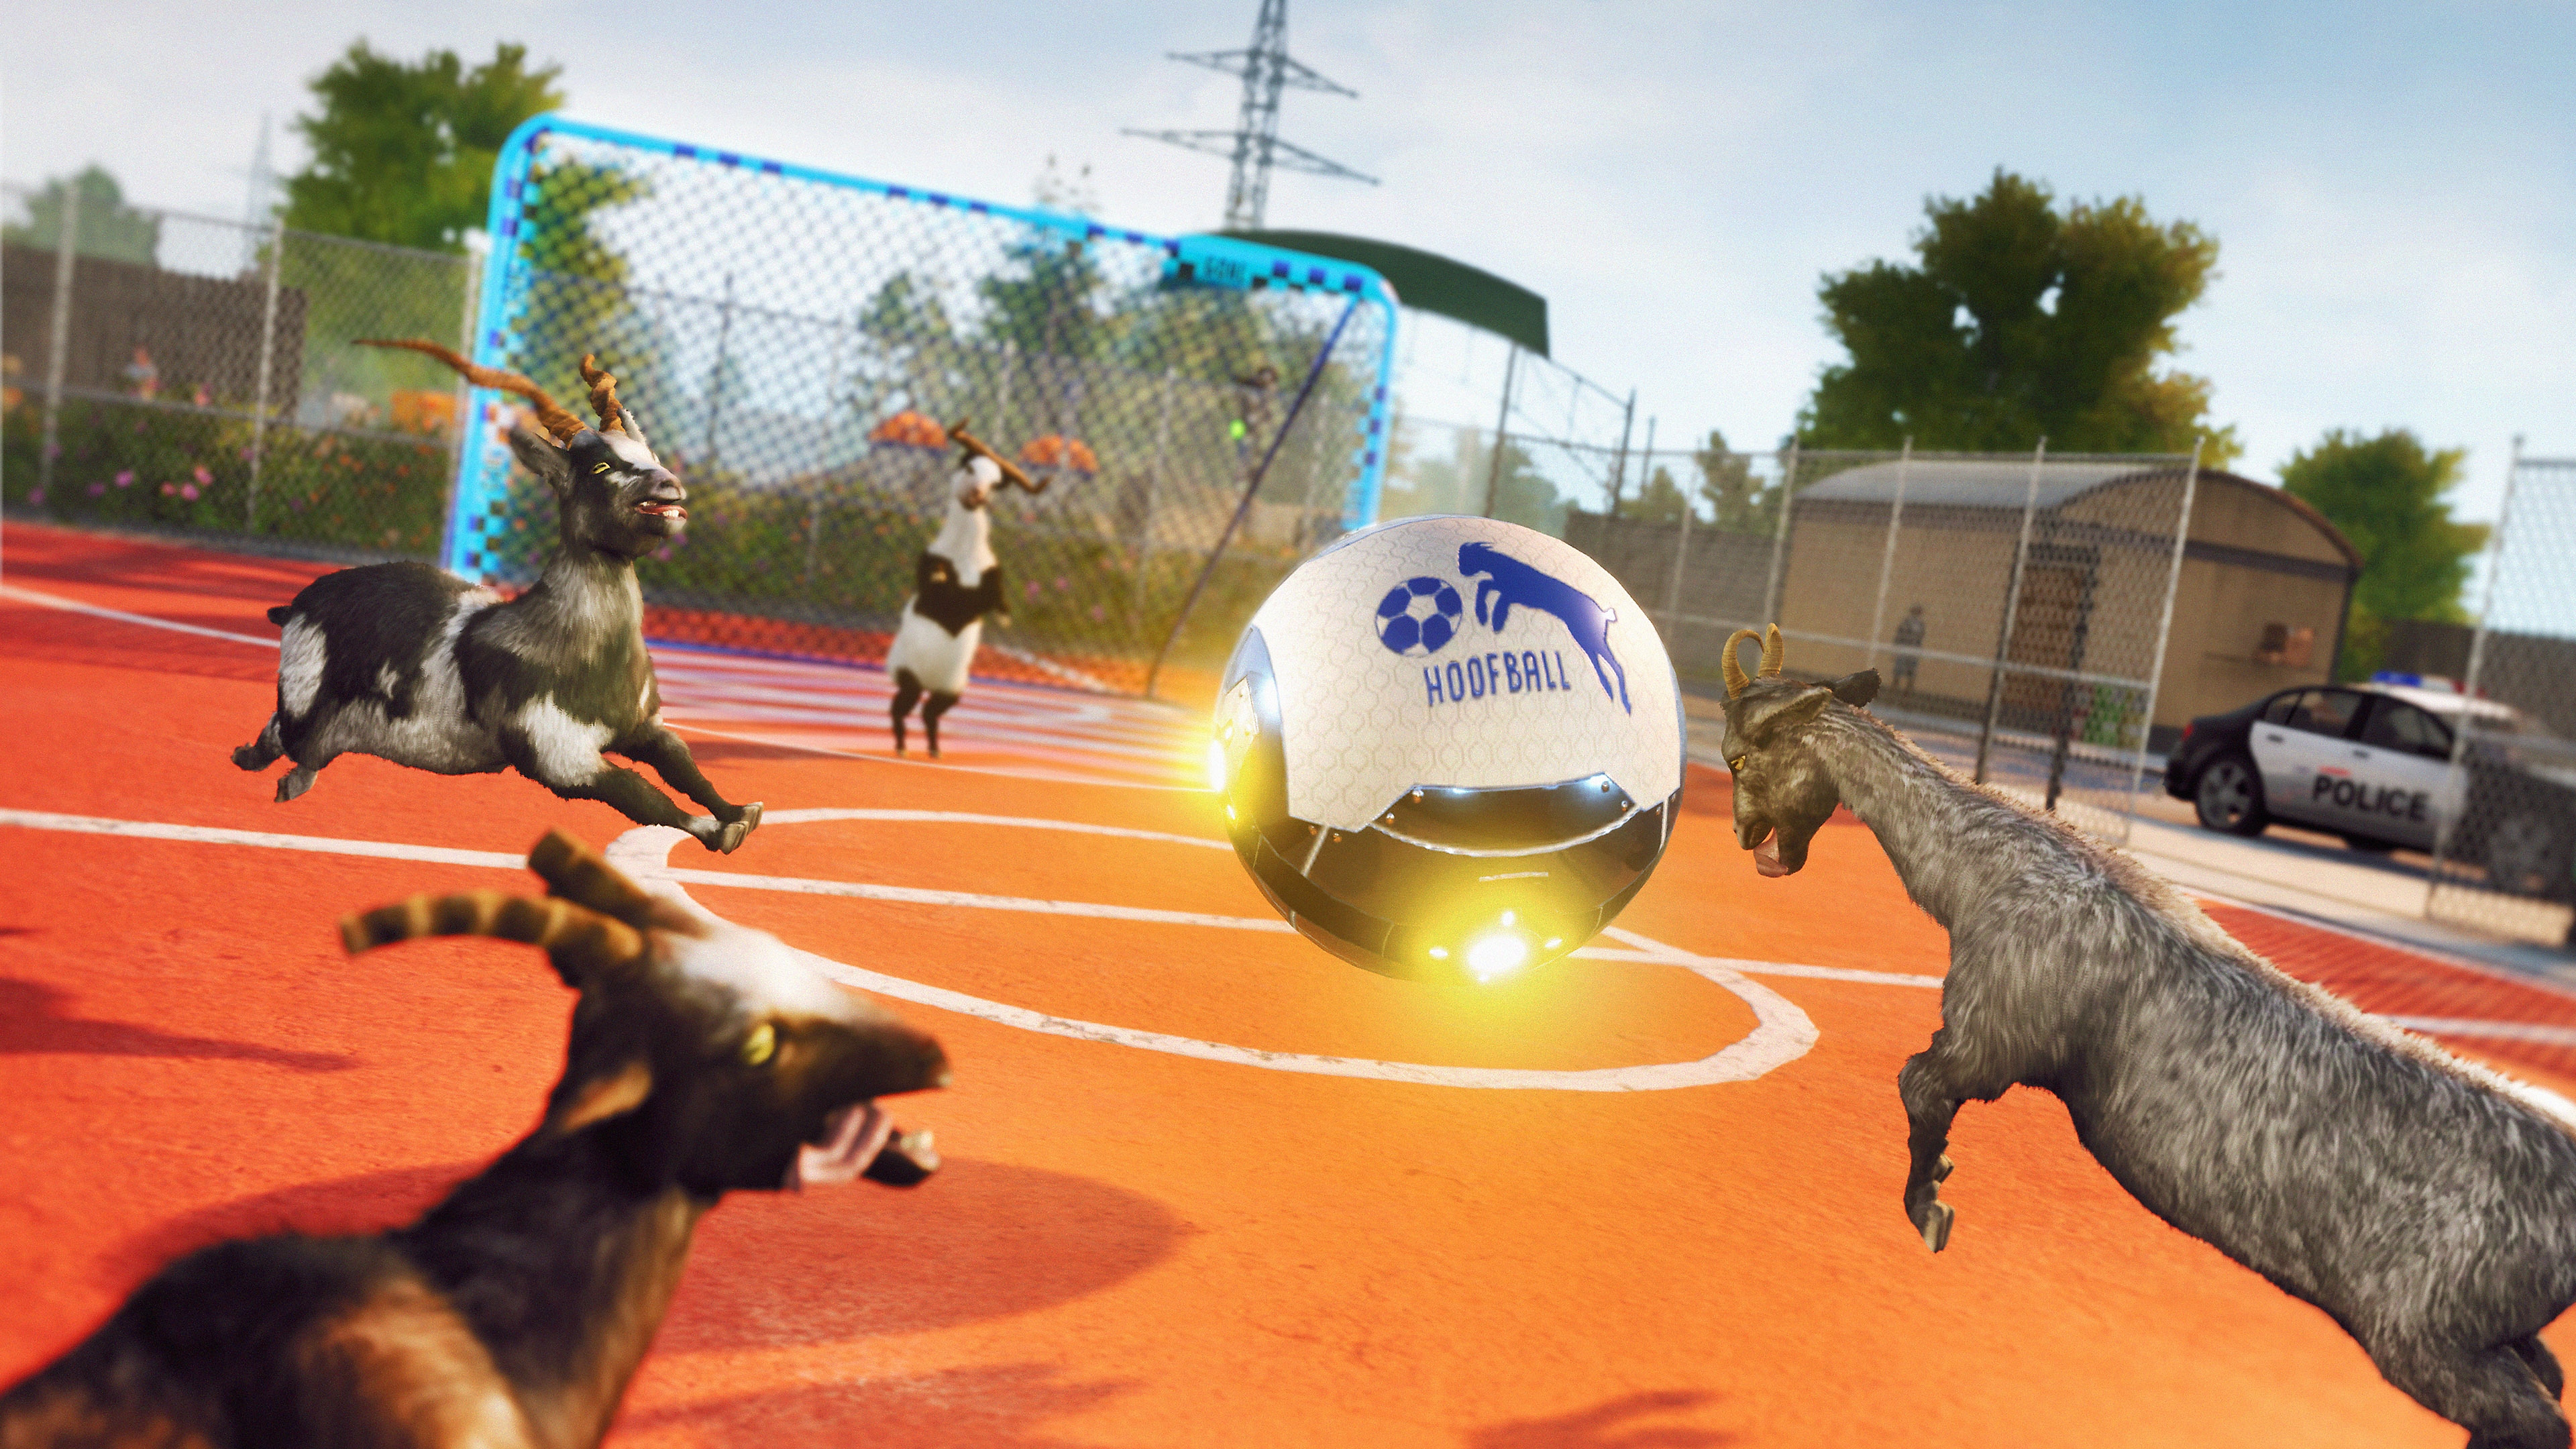 Goat Simulator 3 screenshot showing goats playing football with a giant ball